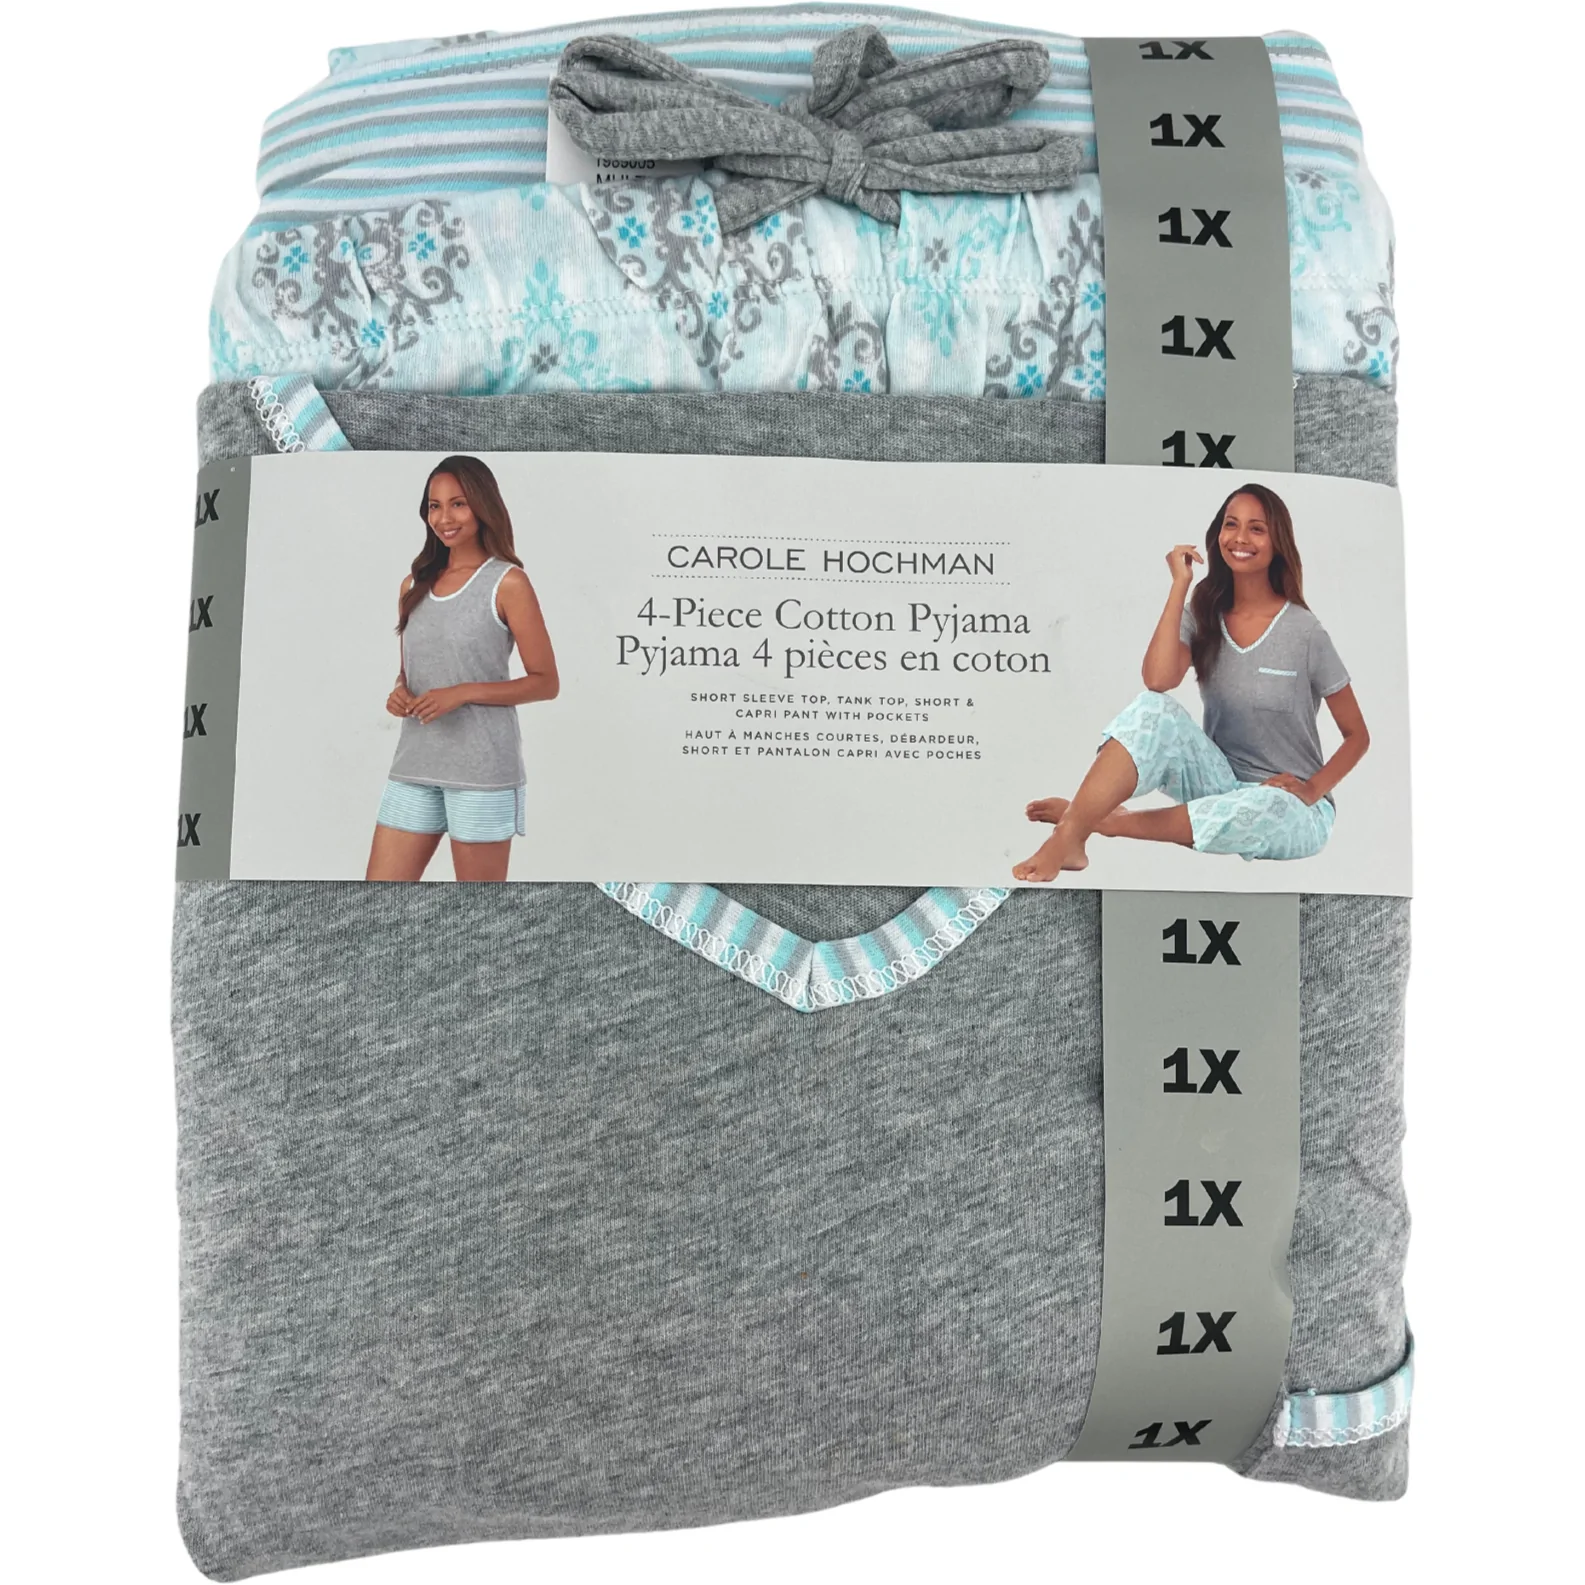 Ladies 4 Piece Pyjama Set from Carole Hochman - these are made from 100%  cotton! You get a short sleeve top, tank top, shorts, and Capri